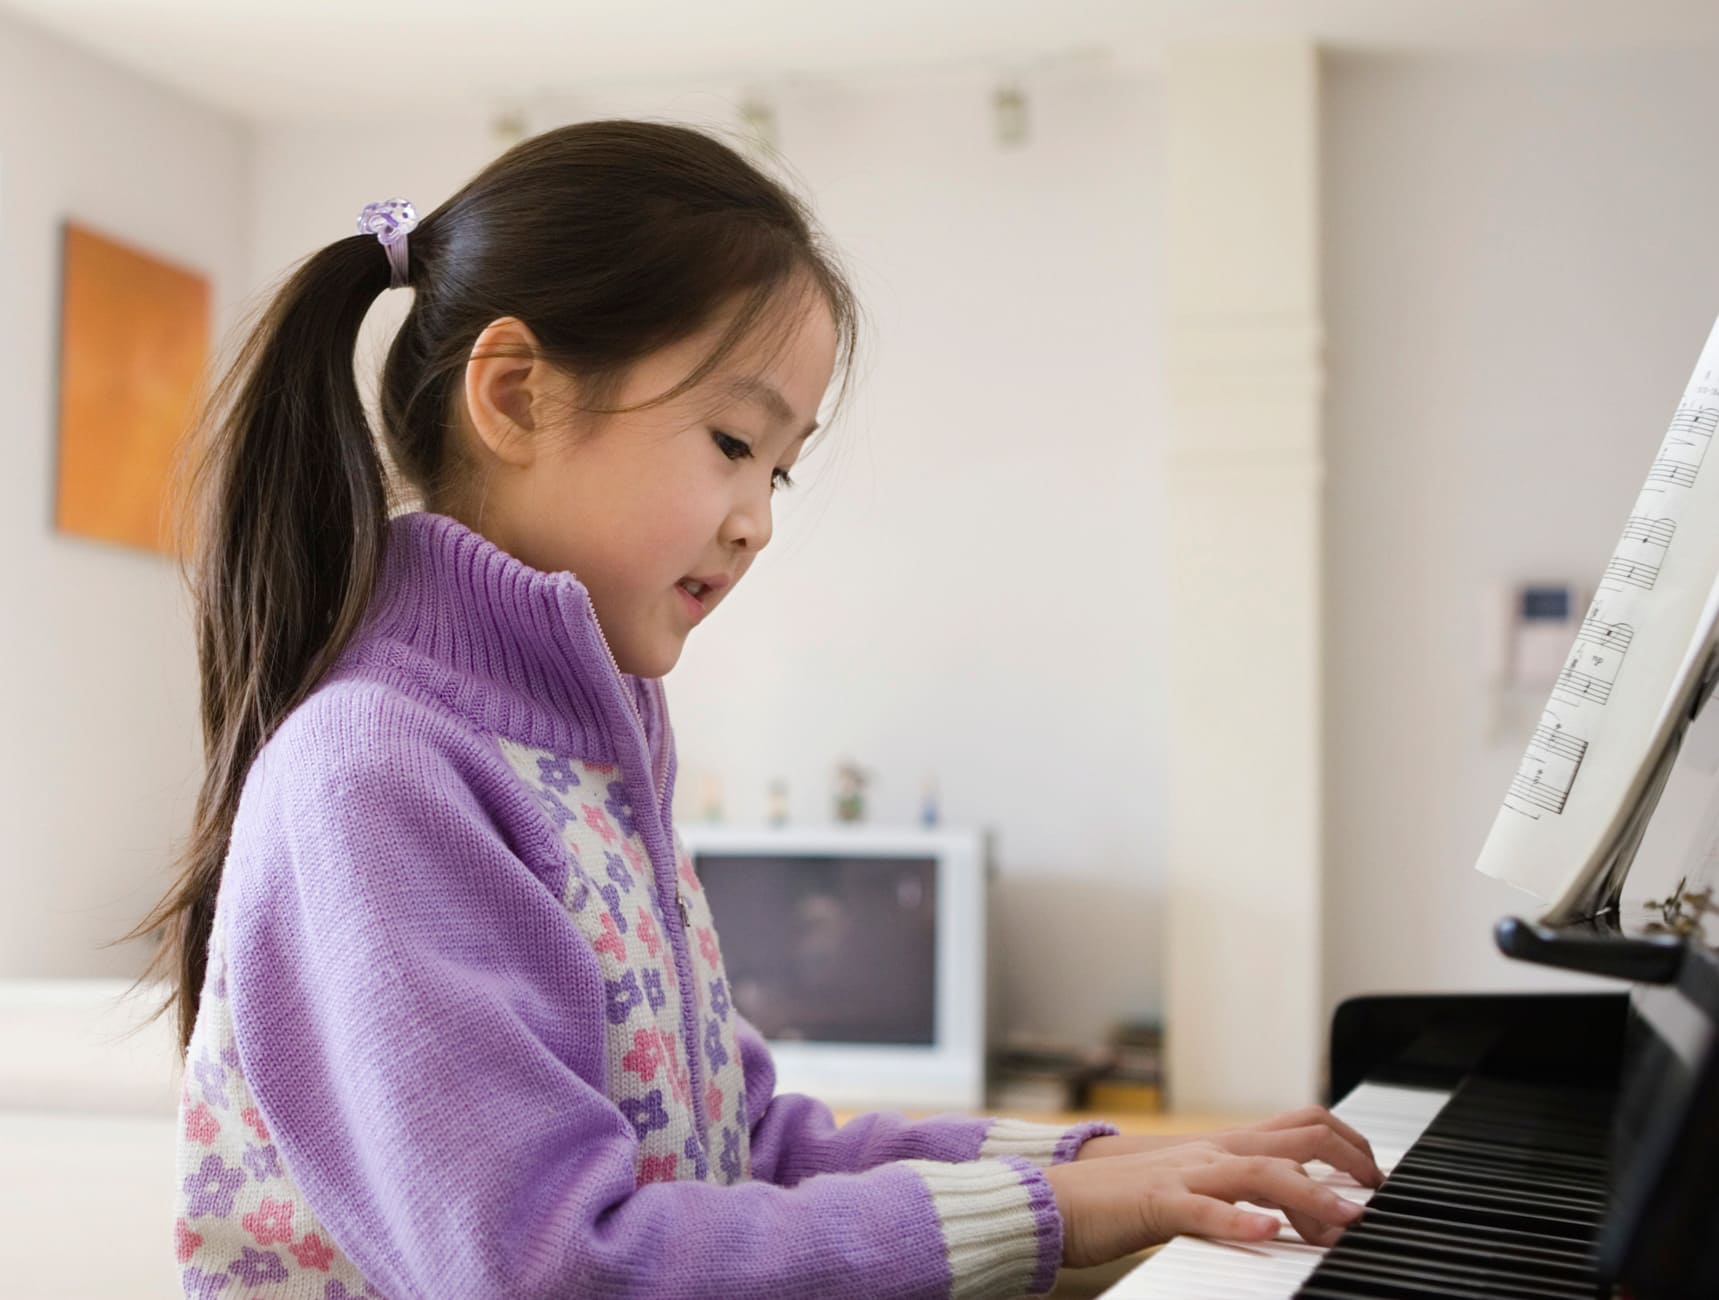 Learning piano at home as an enrichment during home based learning